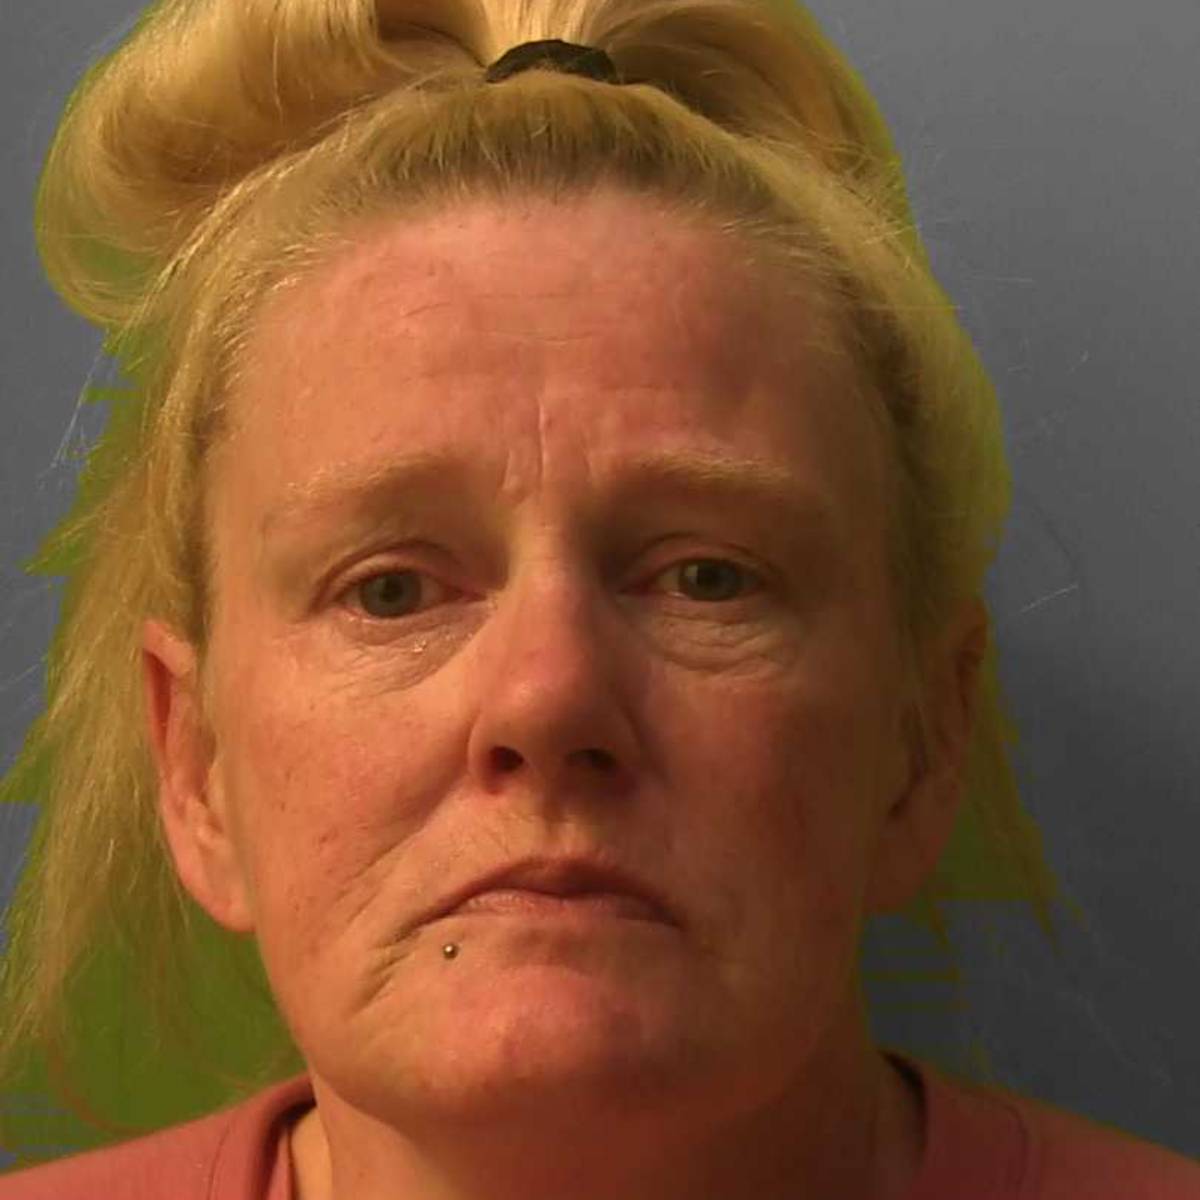 Brighton Woman Wanted For Return To Prison Brighton And Hove News 8809